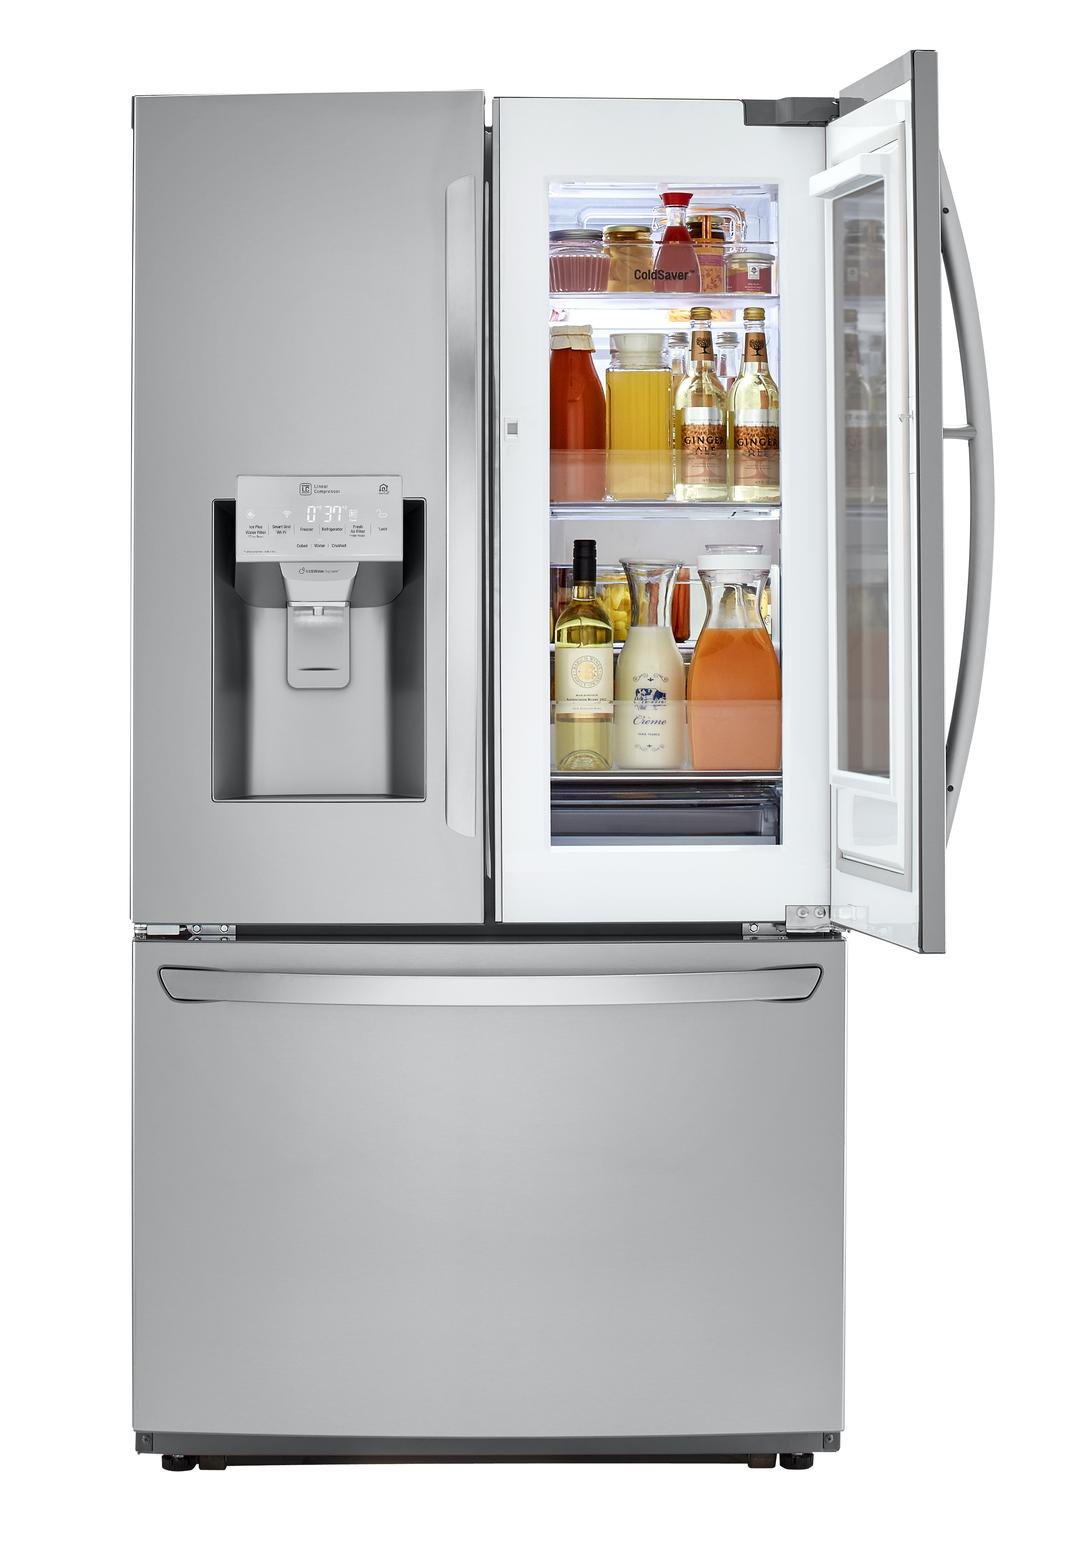 LG - 35.8 Inch 21.9 cu. ft French Door Refrigerator in Stainless - LFXC22596S